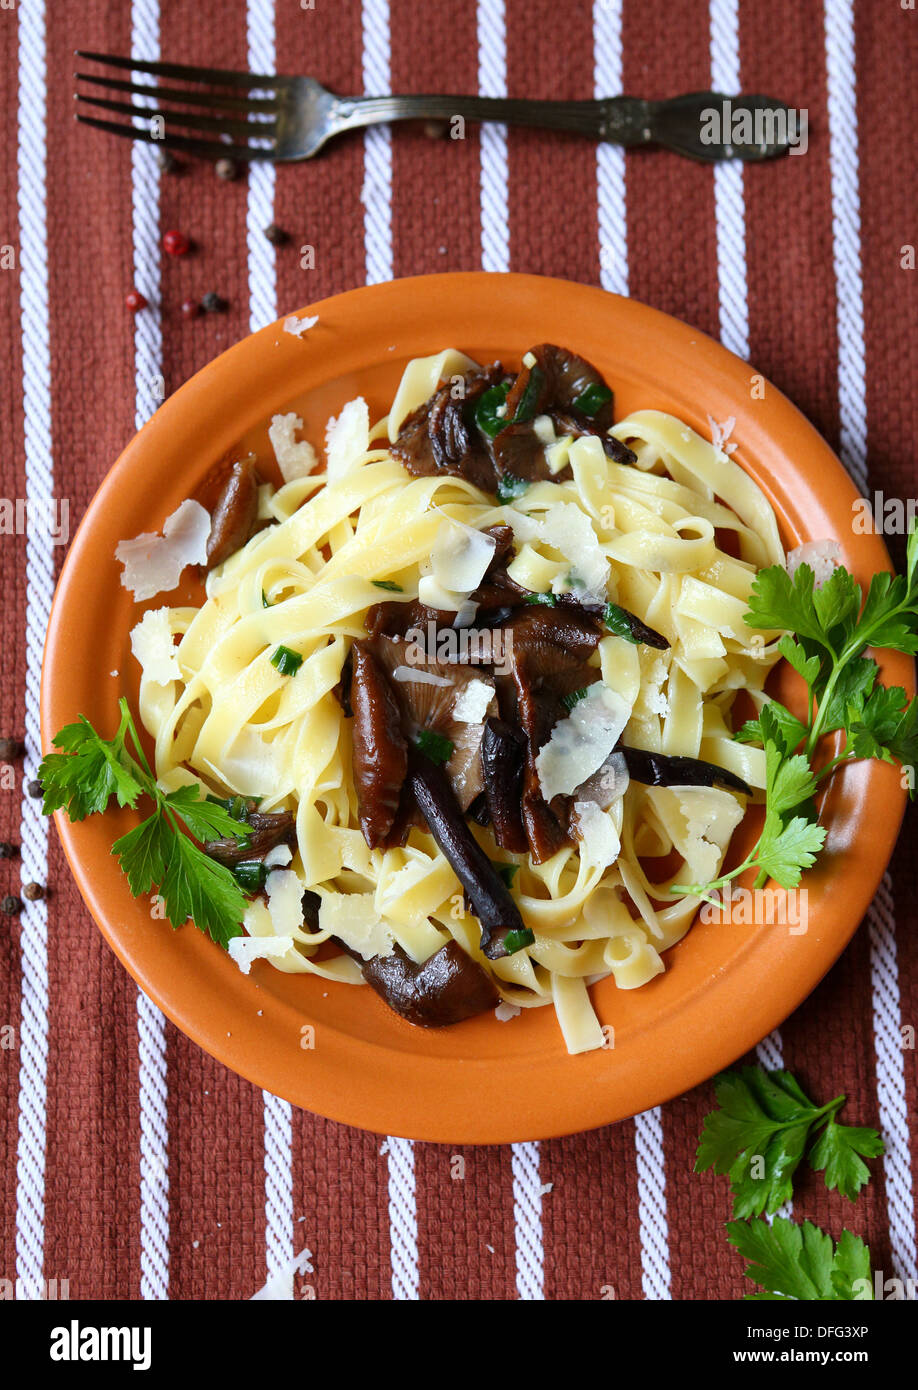 Tagliatelle pasta with fried mushrooms, top view food Stock Photo